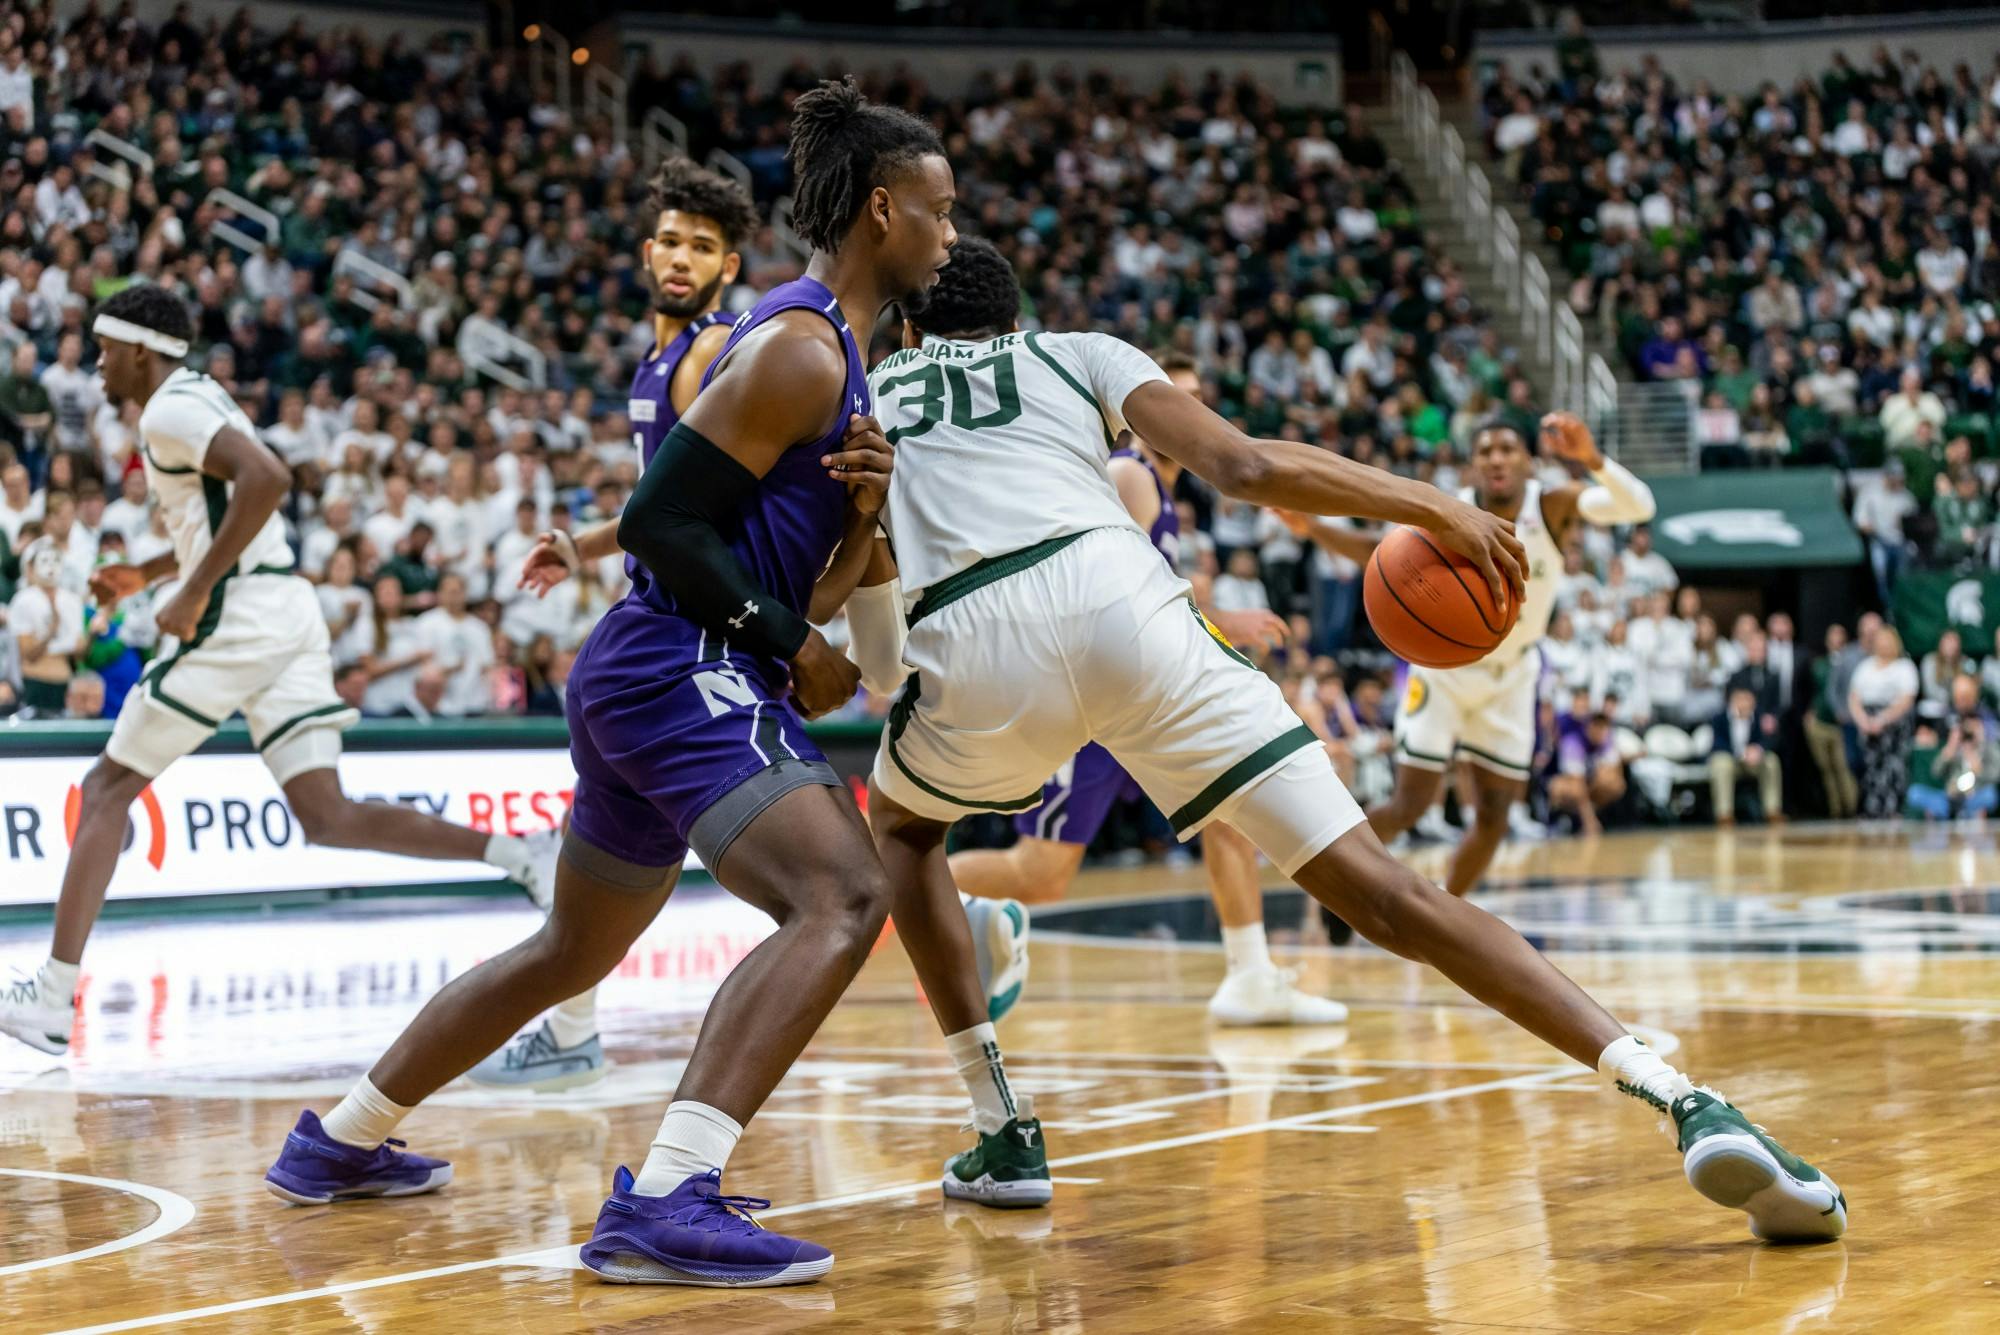 <p>Sophomore forward Marcus Bingham Jr. (30) backs down Northwestern’s Jared Jones (left). The Spartans defeated the Wildcats, 79-50, on Jan. 29, 2020 at the Breslin Student Events Center. </p>